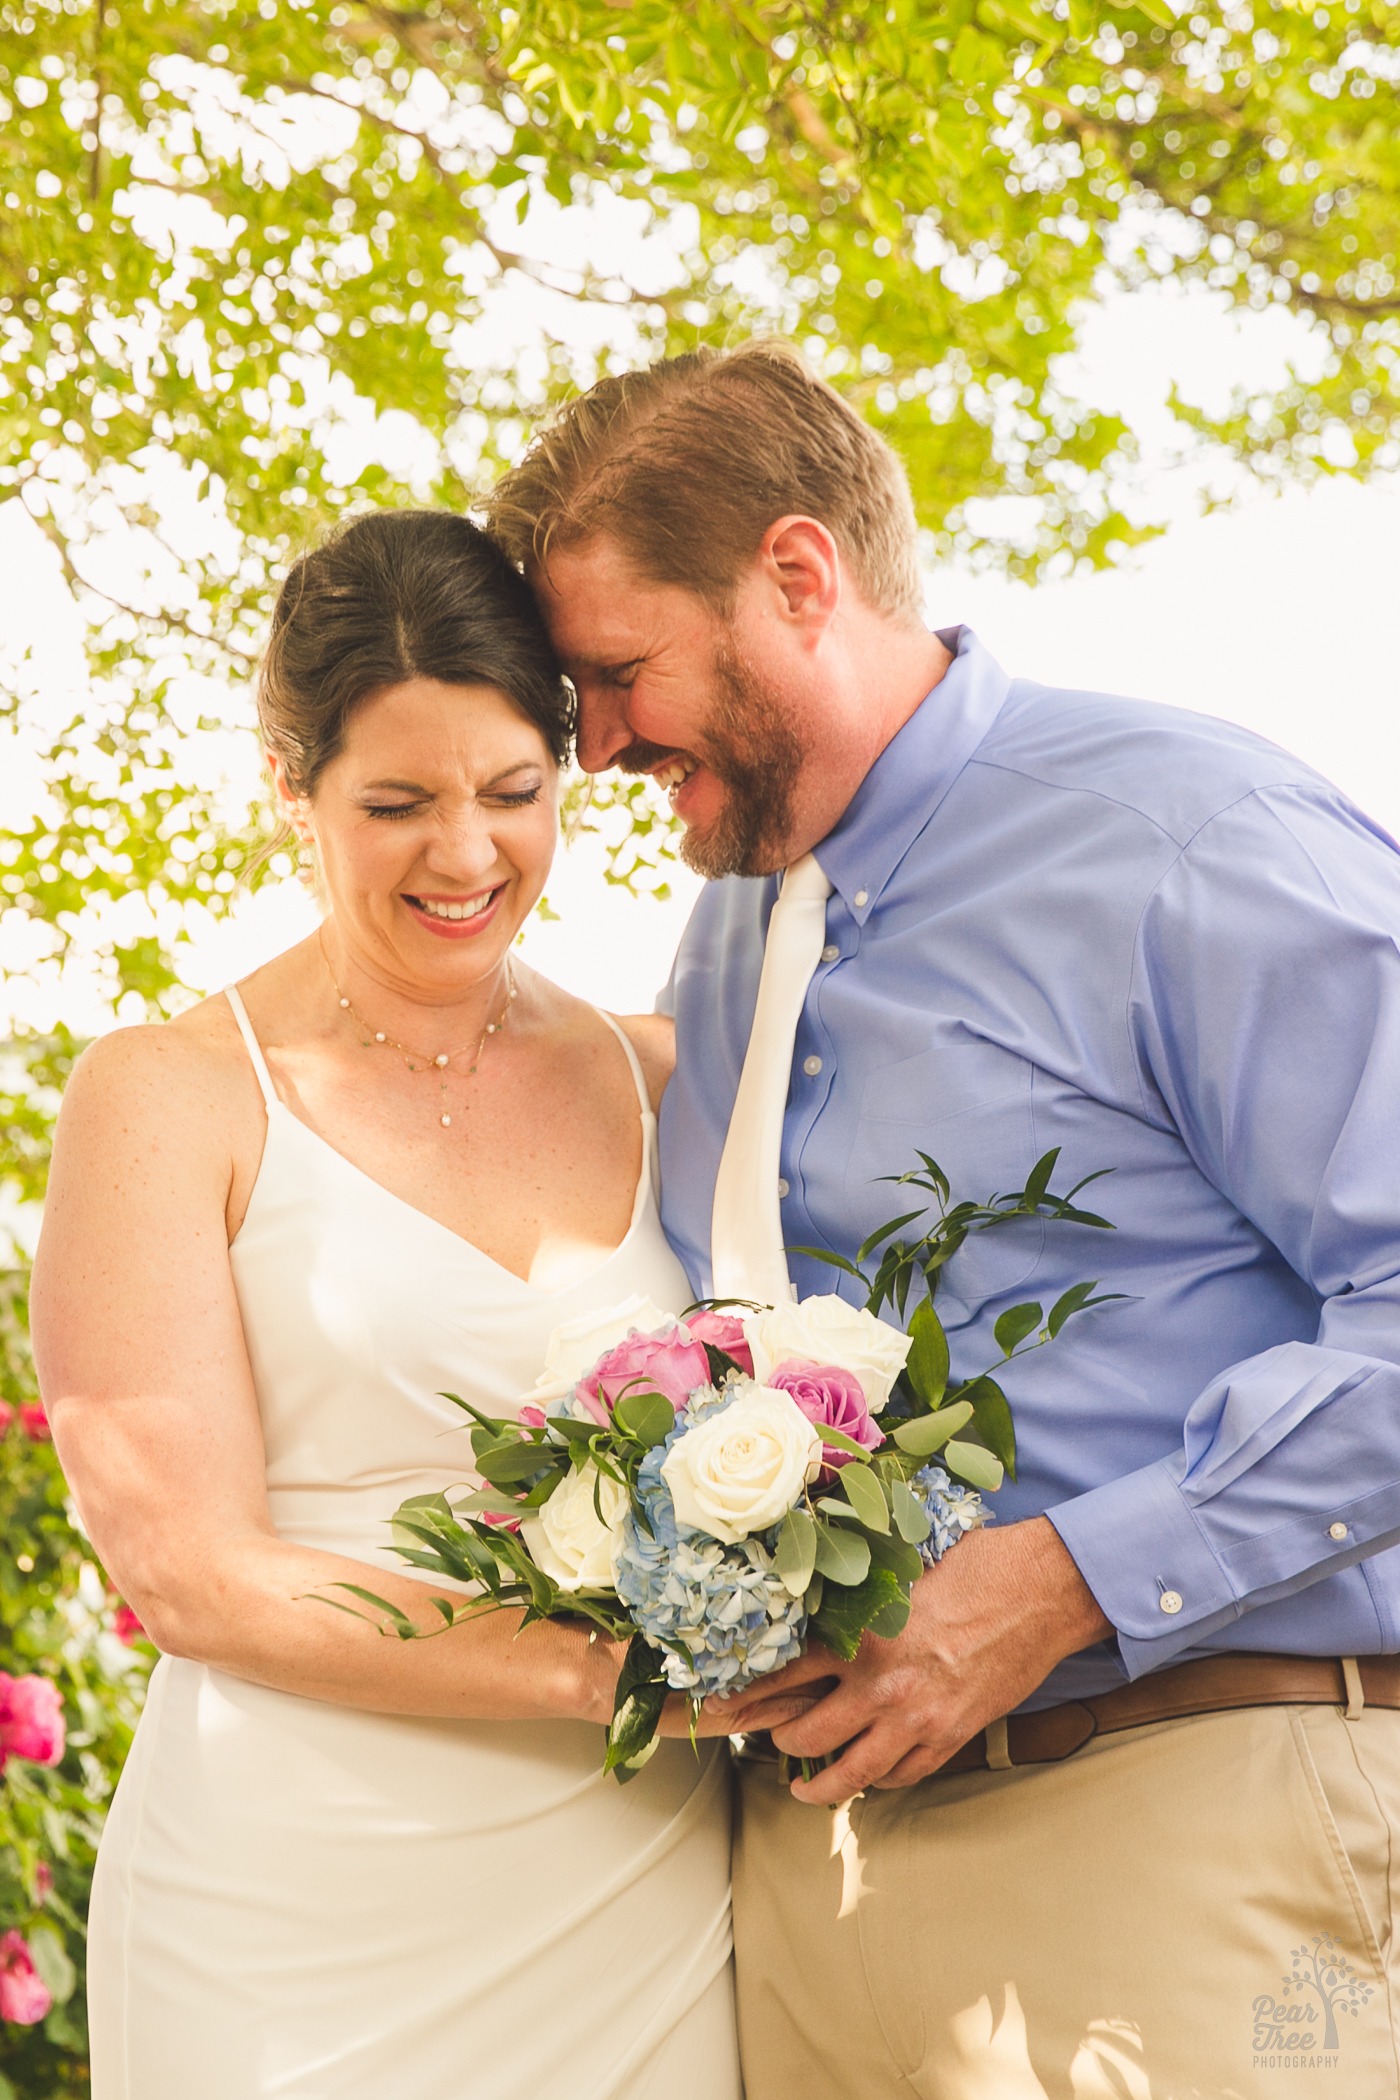 Bride and groom holding flower bouquet and laughing hard